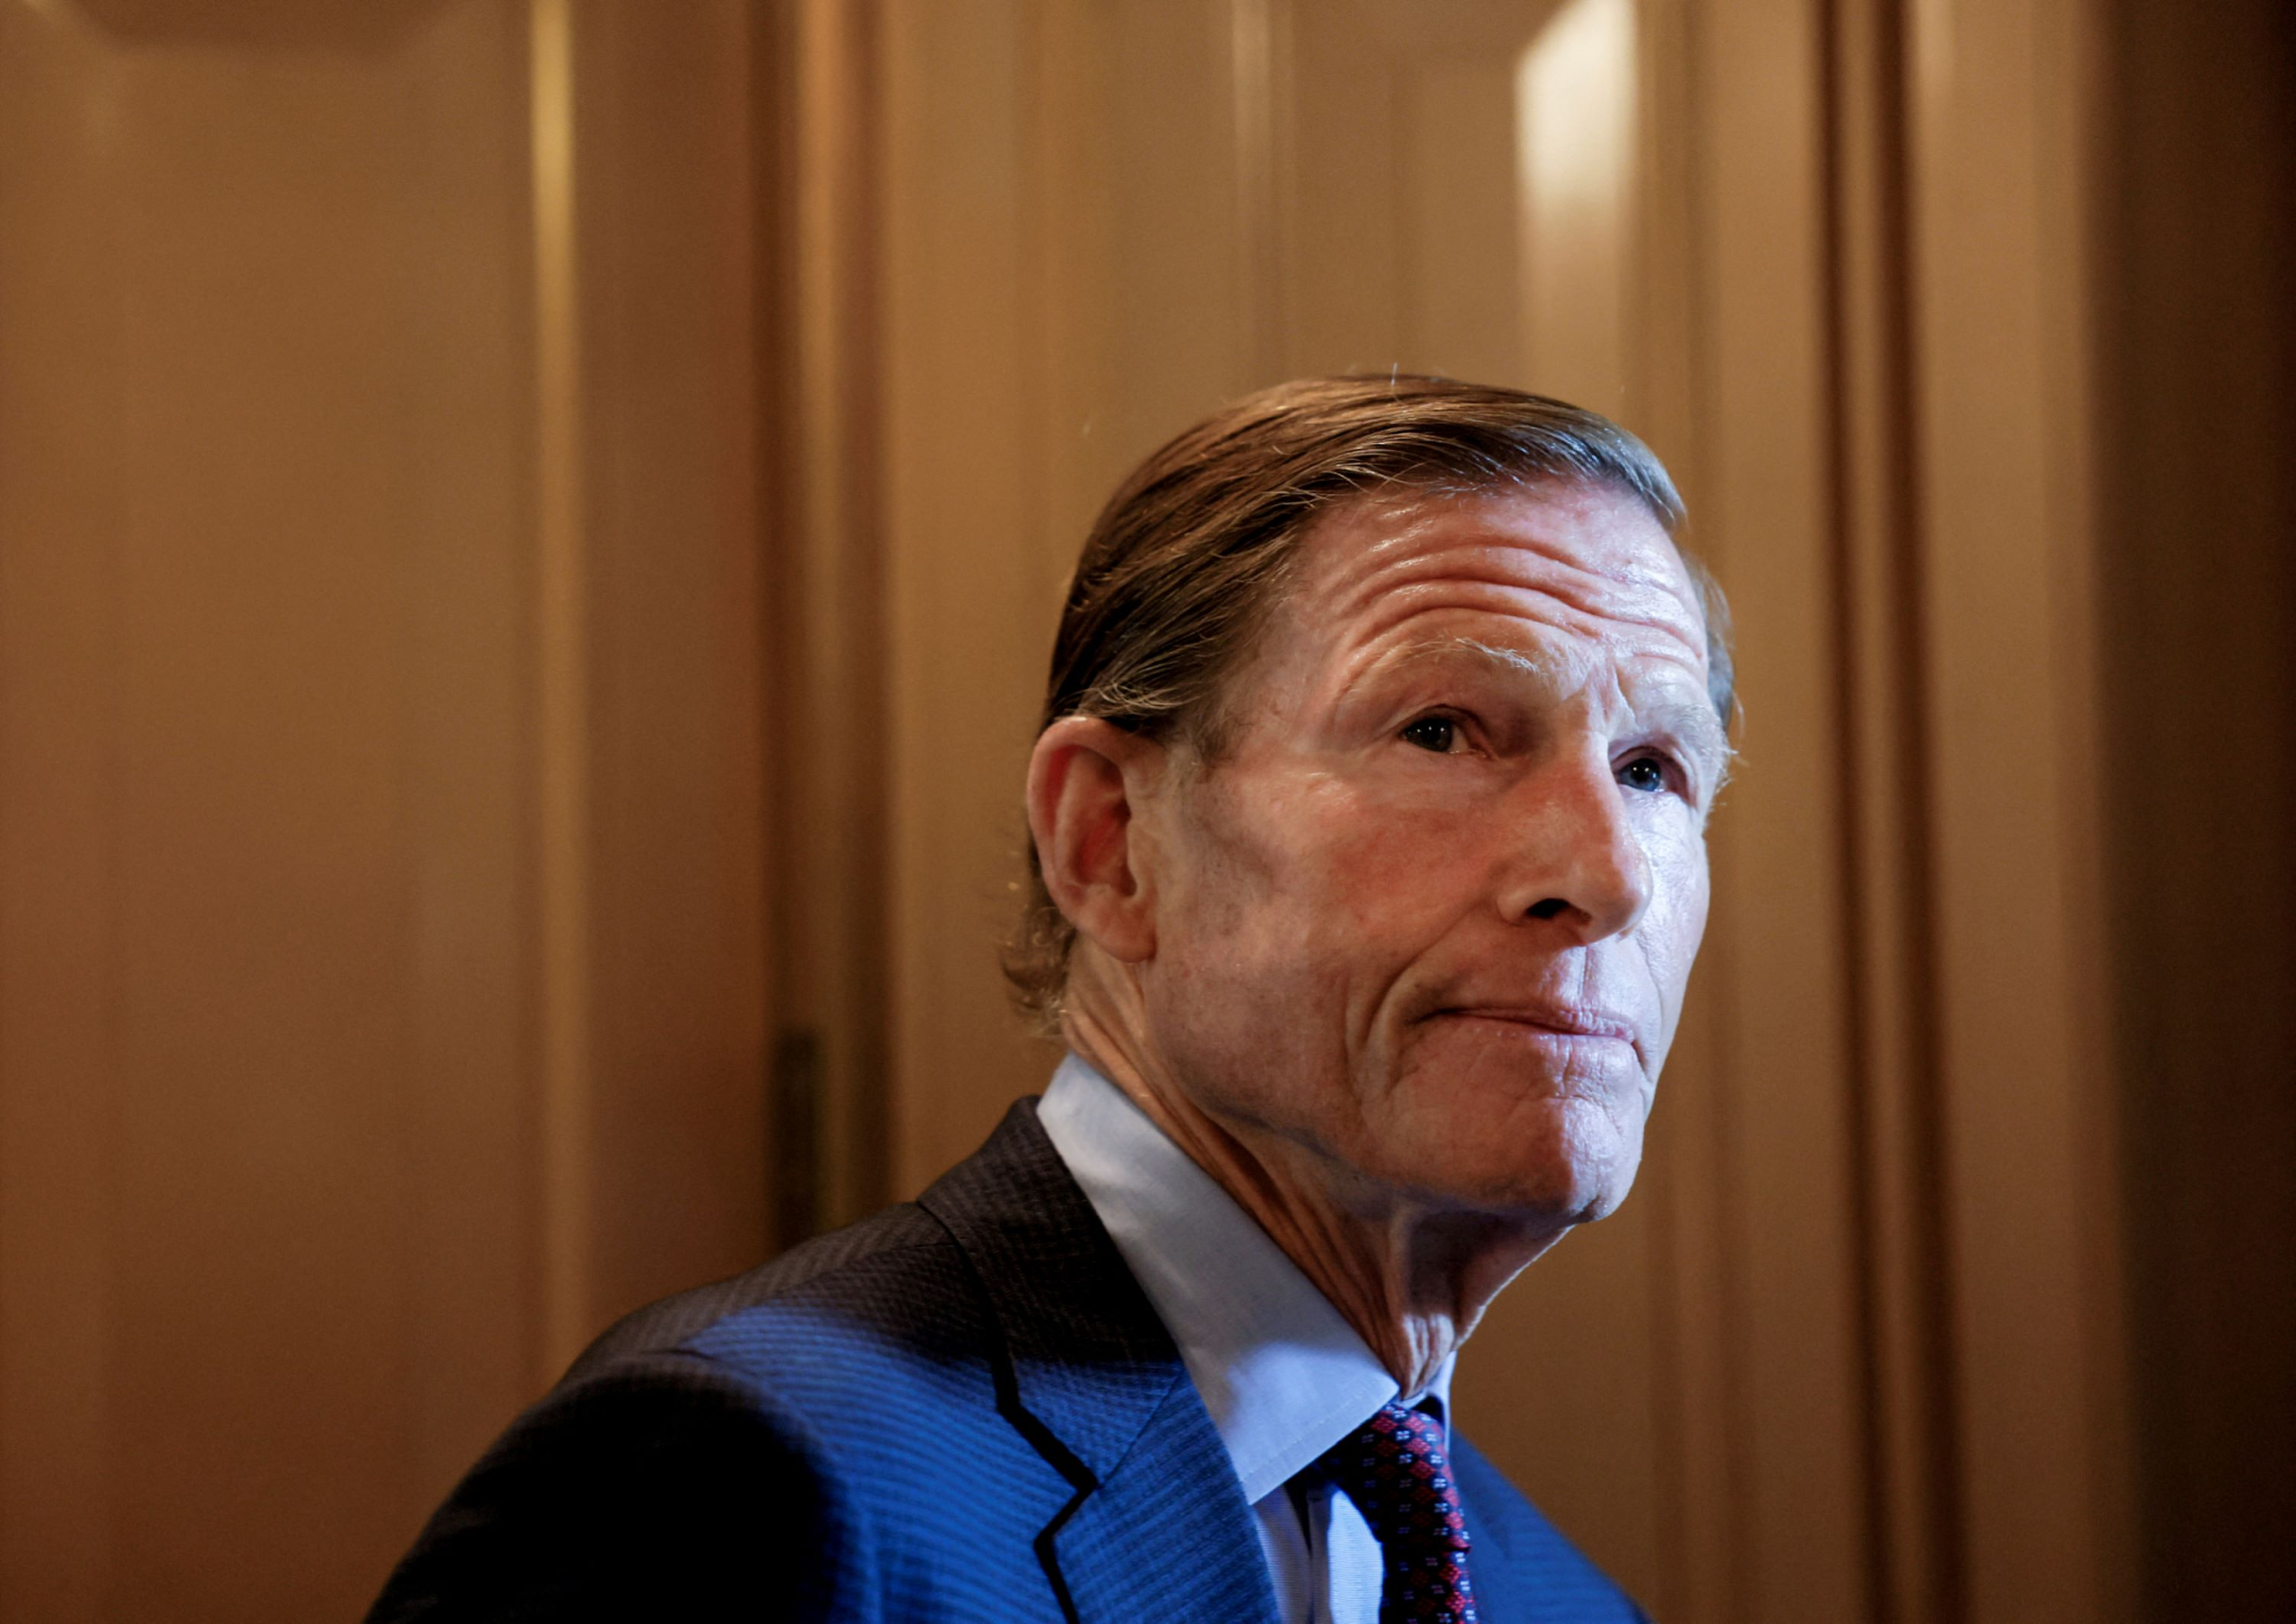 The Lisa Wexler Show – Remembering D-Day As Sen. Blumenthal Attends The 80th Anniversary In Normandy